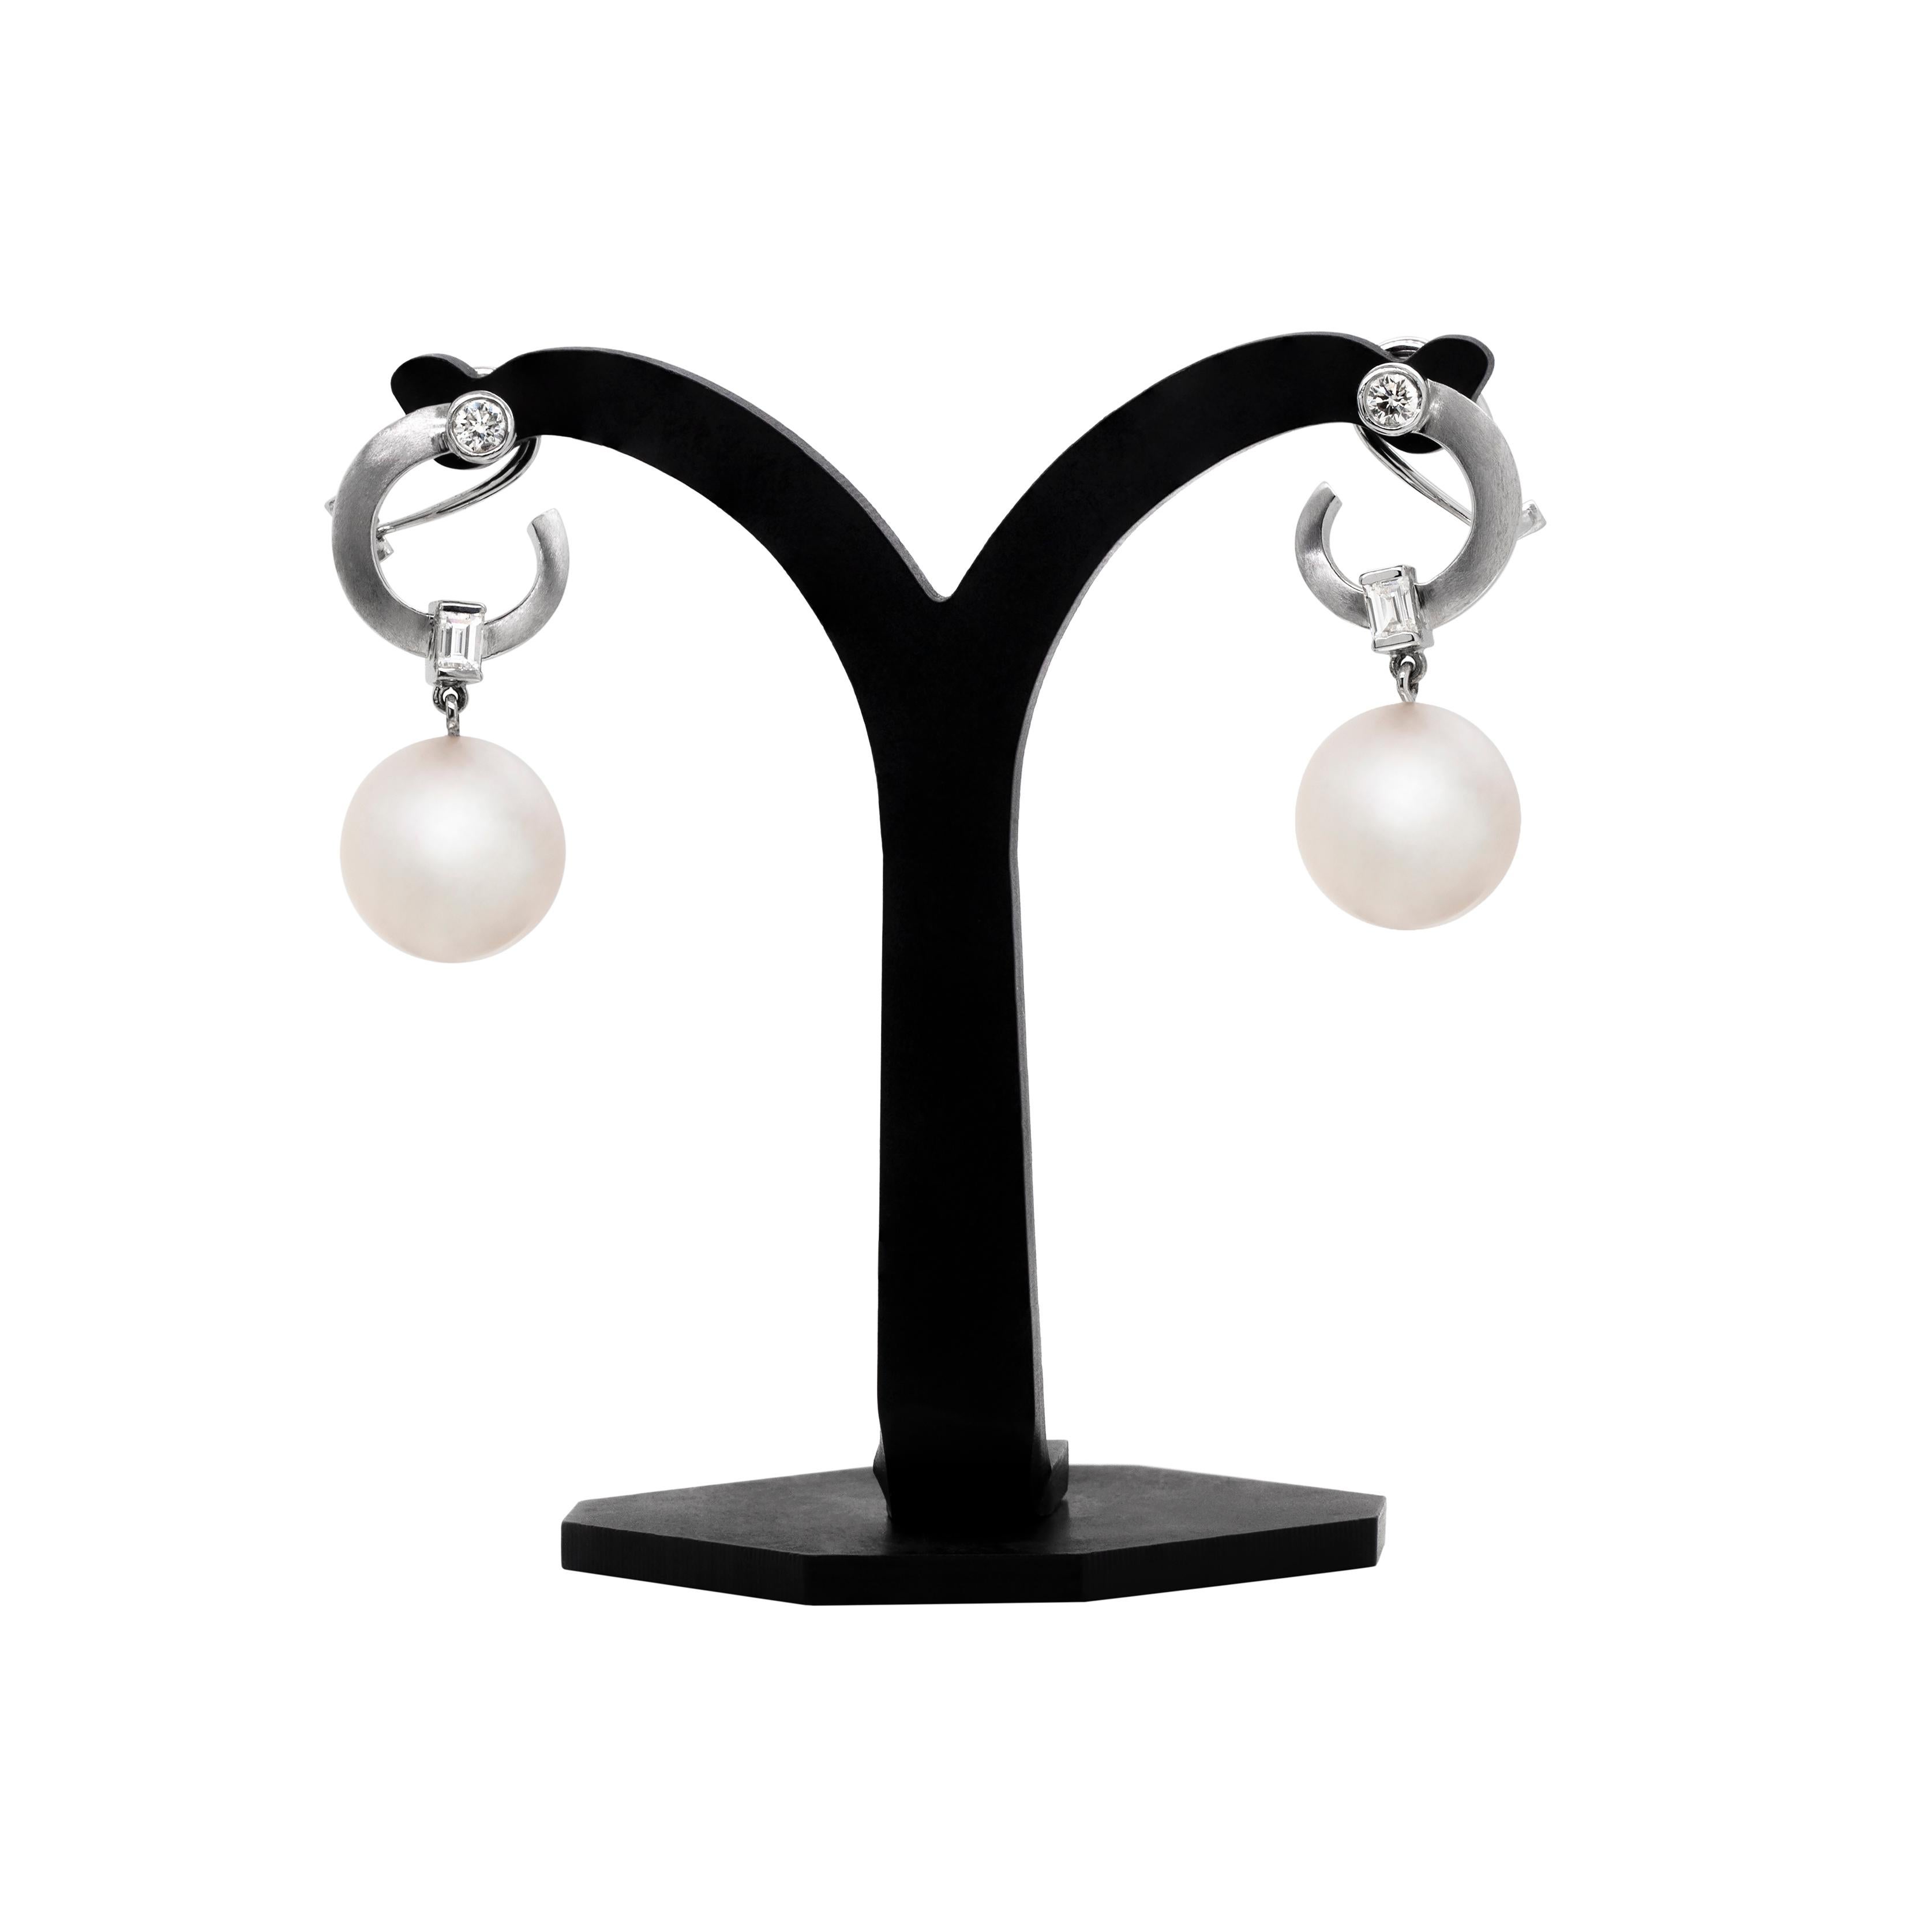 These gorgeous dress earrings are made in 18 carat white gold, each featuring a South Sea cultured pearl measuring 12.4mm, suspended below tapering hoops with a matte textured finish, accented by a round brilliant cut and baguette cut diamonds